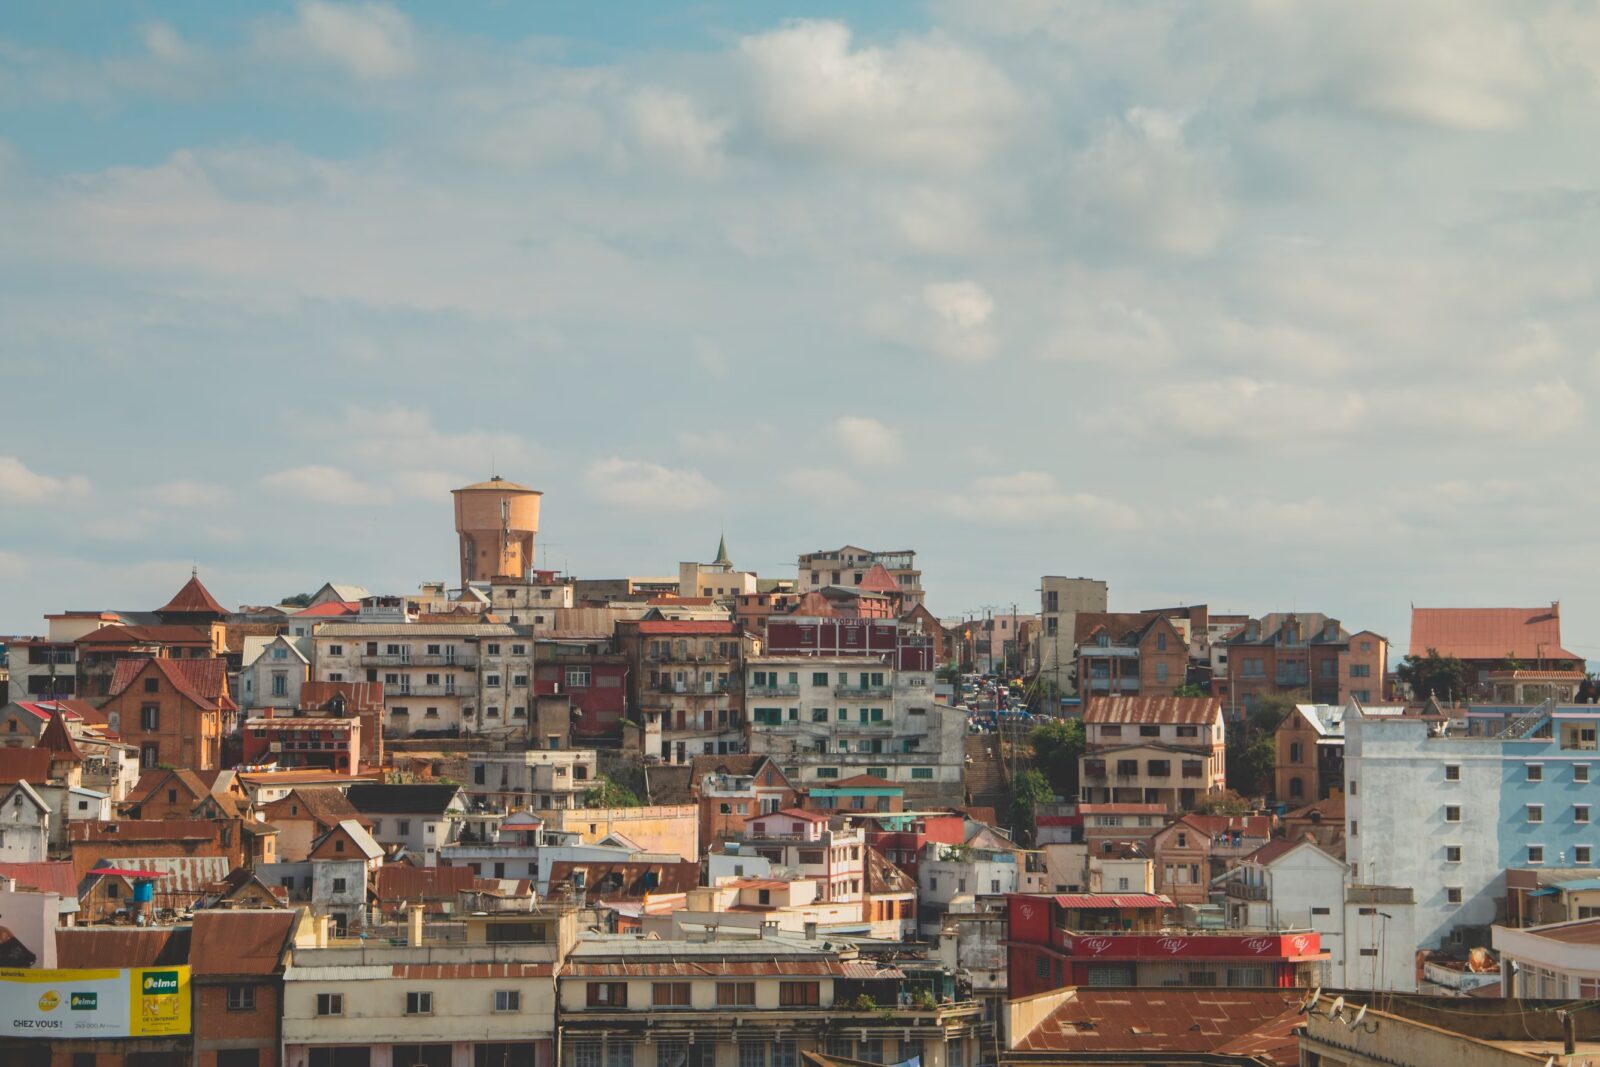 This City-Country Matching Quiz Gets Progressively Harder With Each Question – Can You Keep up With It? Antananarivo, Madagascar